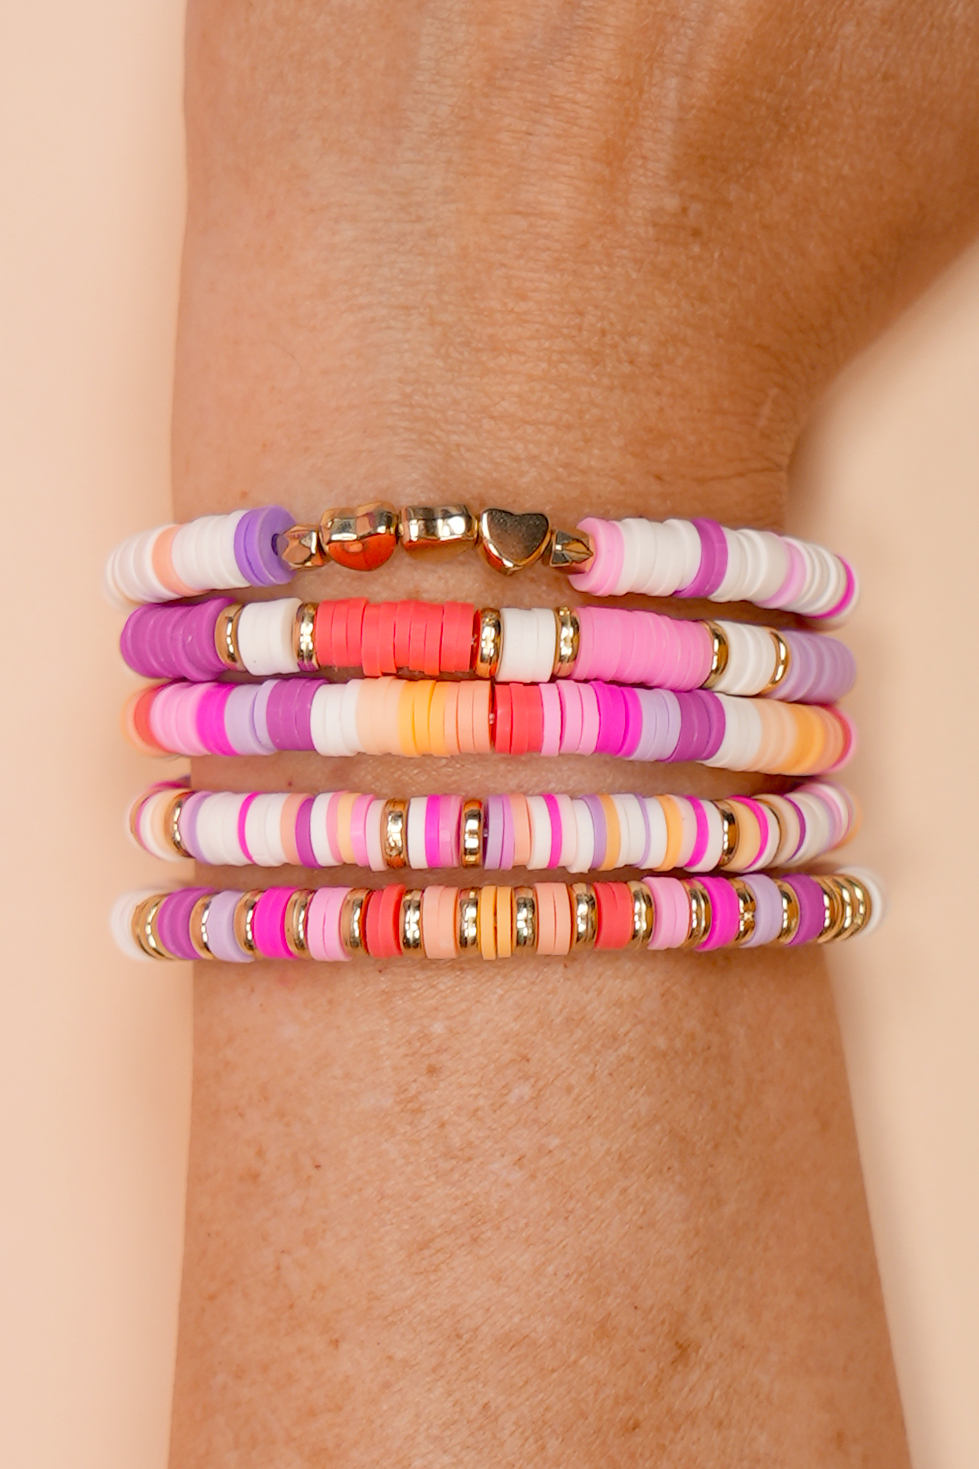 Preppy Clay Bead Bracelet Ideas & How-to Tutorial - Happiness is